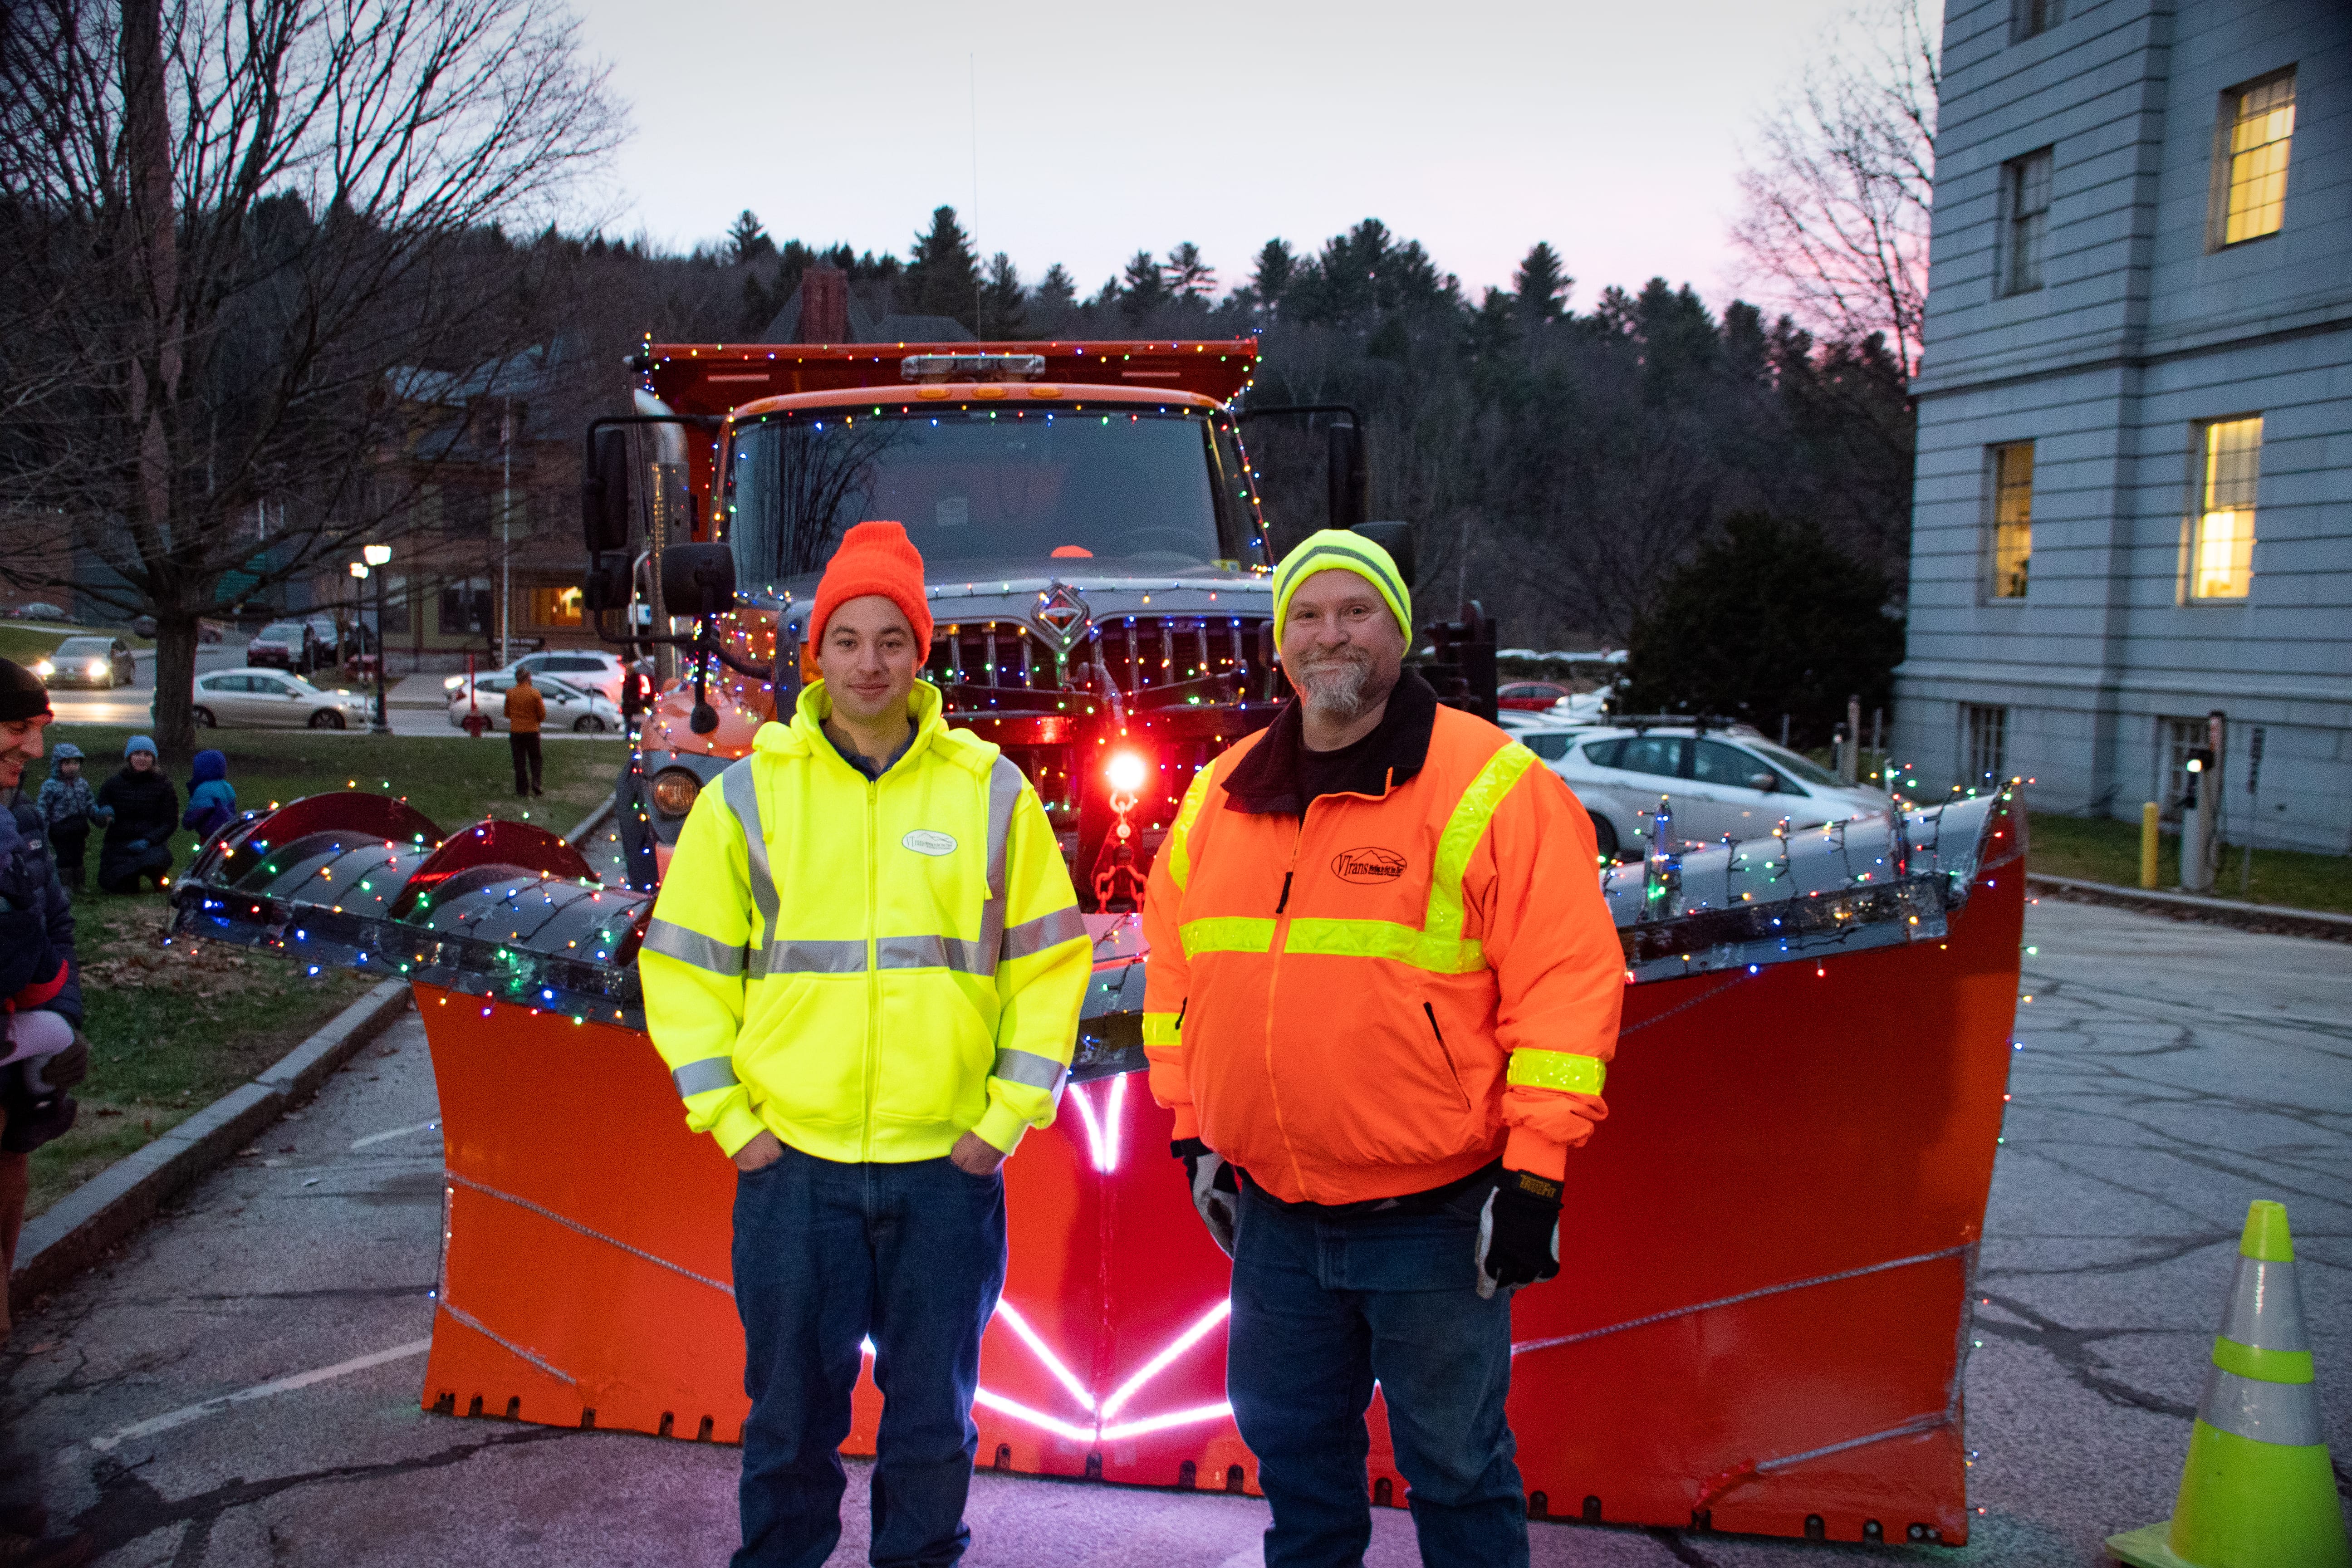 Civil Engineer, Iain Portalupi, and Maintenance Supervisor and plow driver, John Dunbar, pose in front of Rudolph the Snowplow